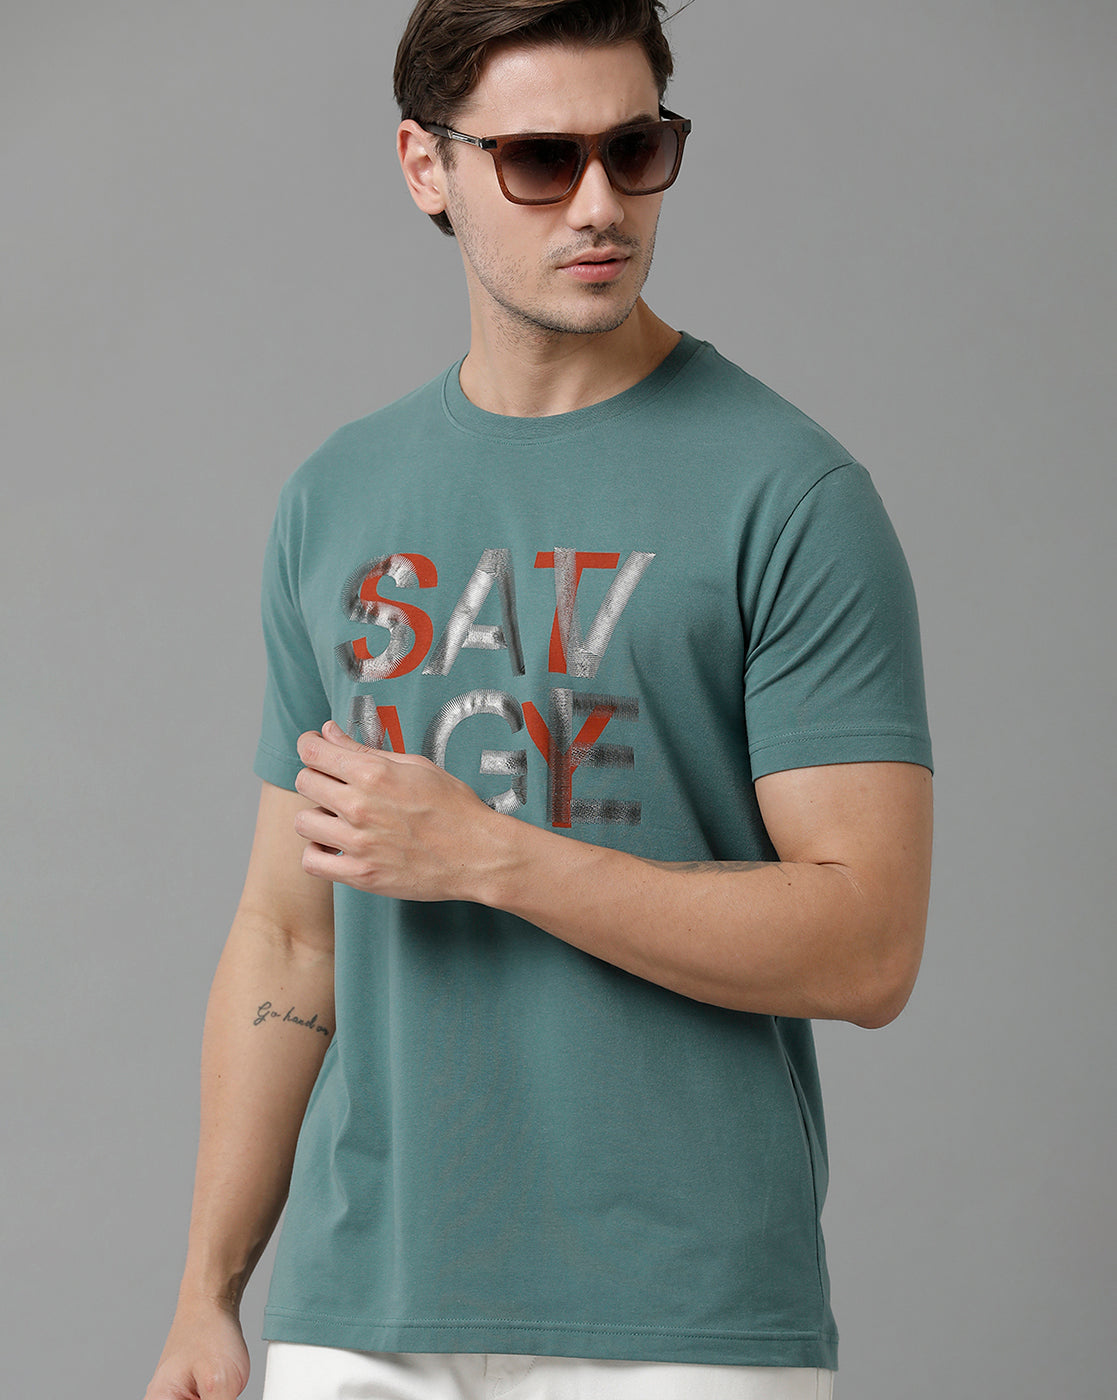 Classic Polo Men's Cotton Half Sleeve Printed Slim Fit Round Neck Grey Color T-Shirt | Baleno - 497 B